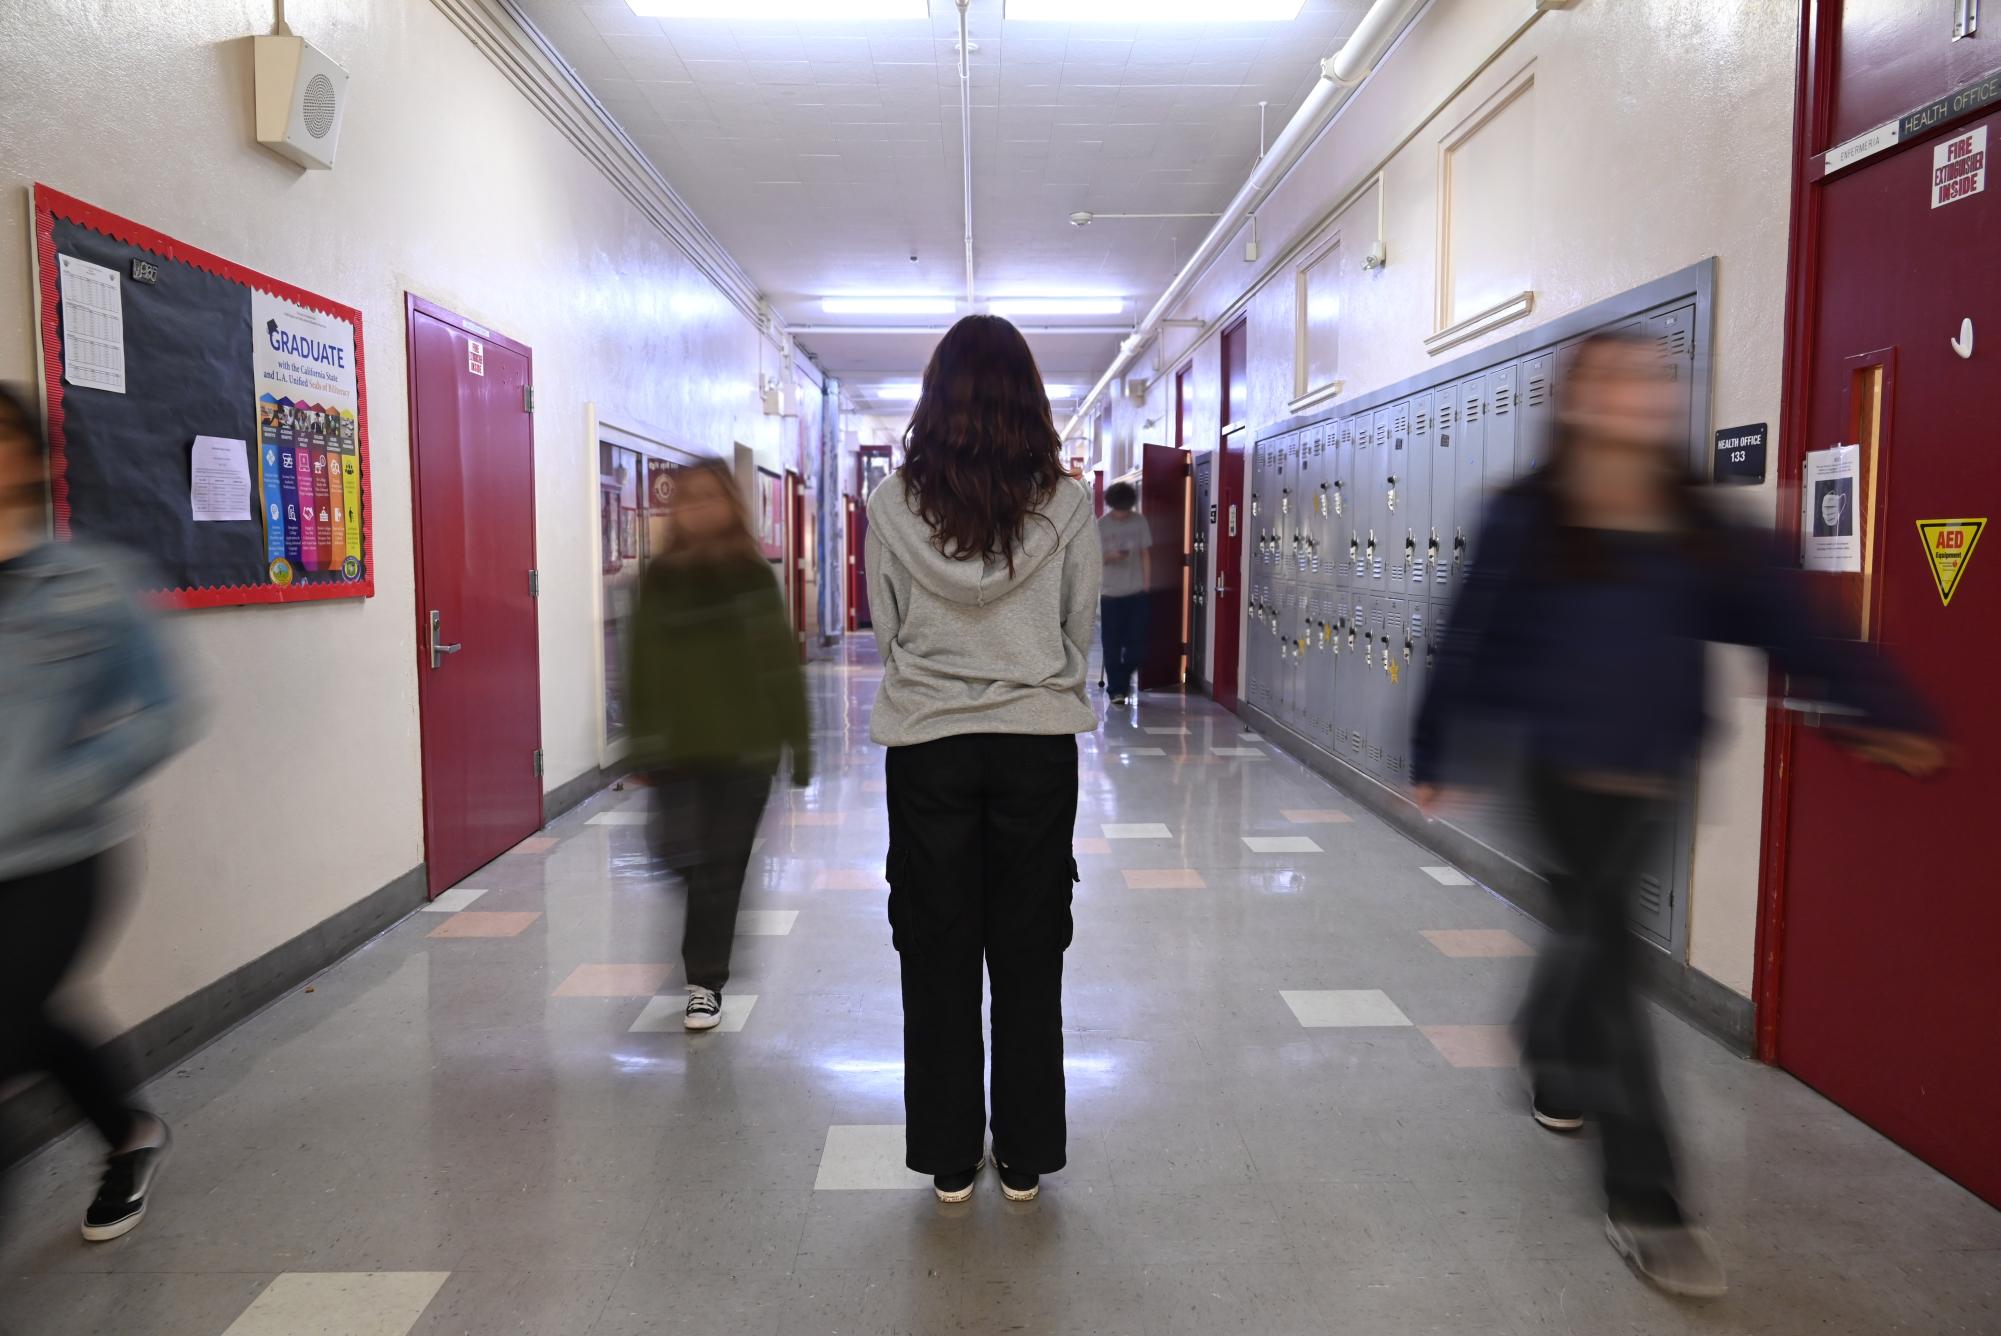 EMPTY HALLS With a current enrollment number of 2178 this year, the school has 113 fewer students than last year. This has led to the dismissal of several teachers.